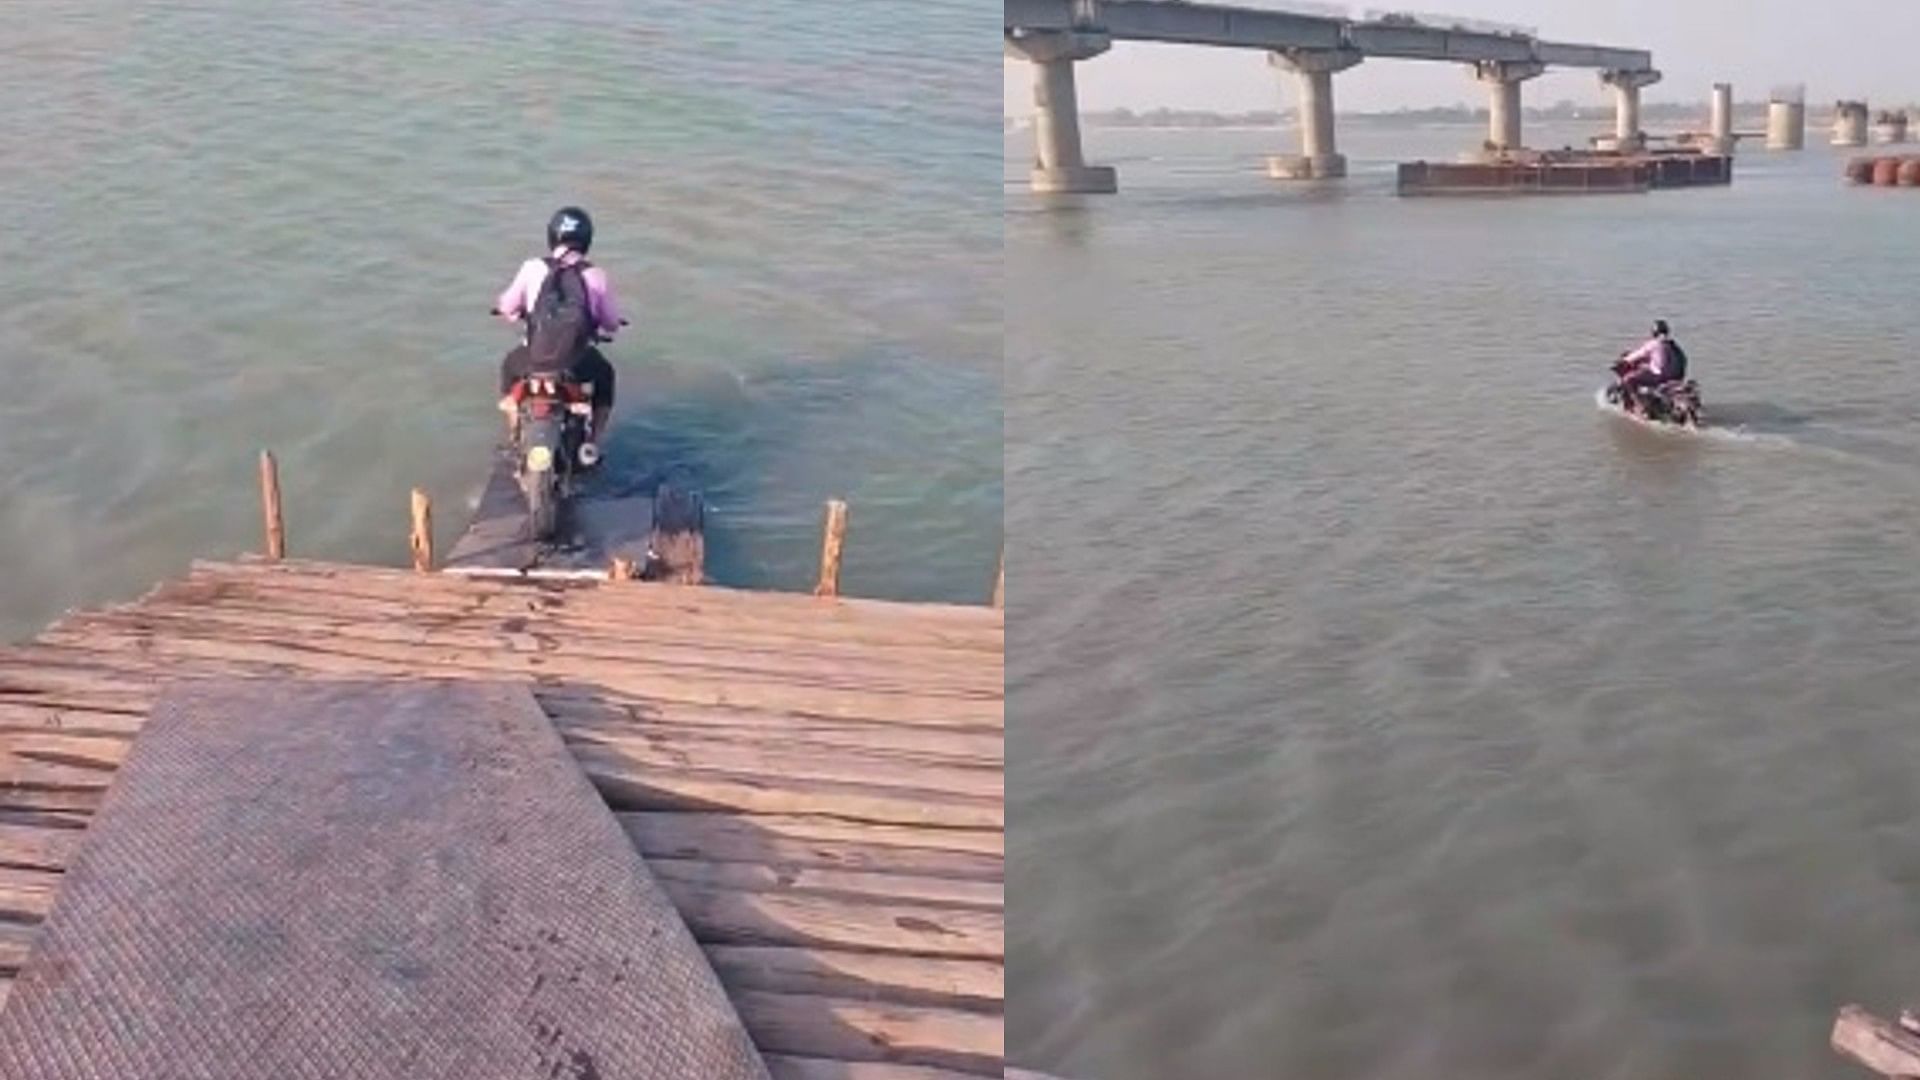 Bike Driving In River: man riding bike in river video goes viral on internet